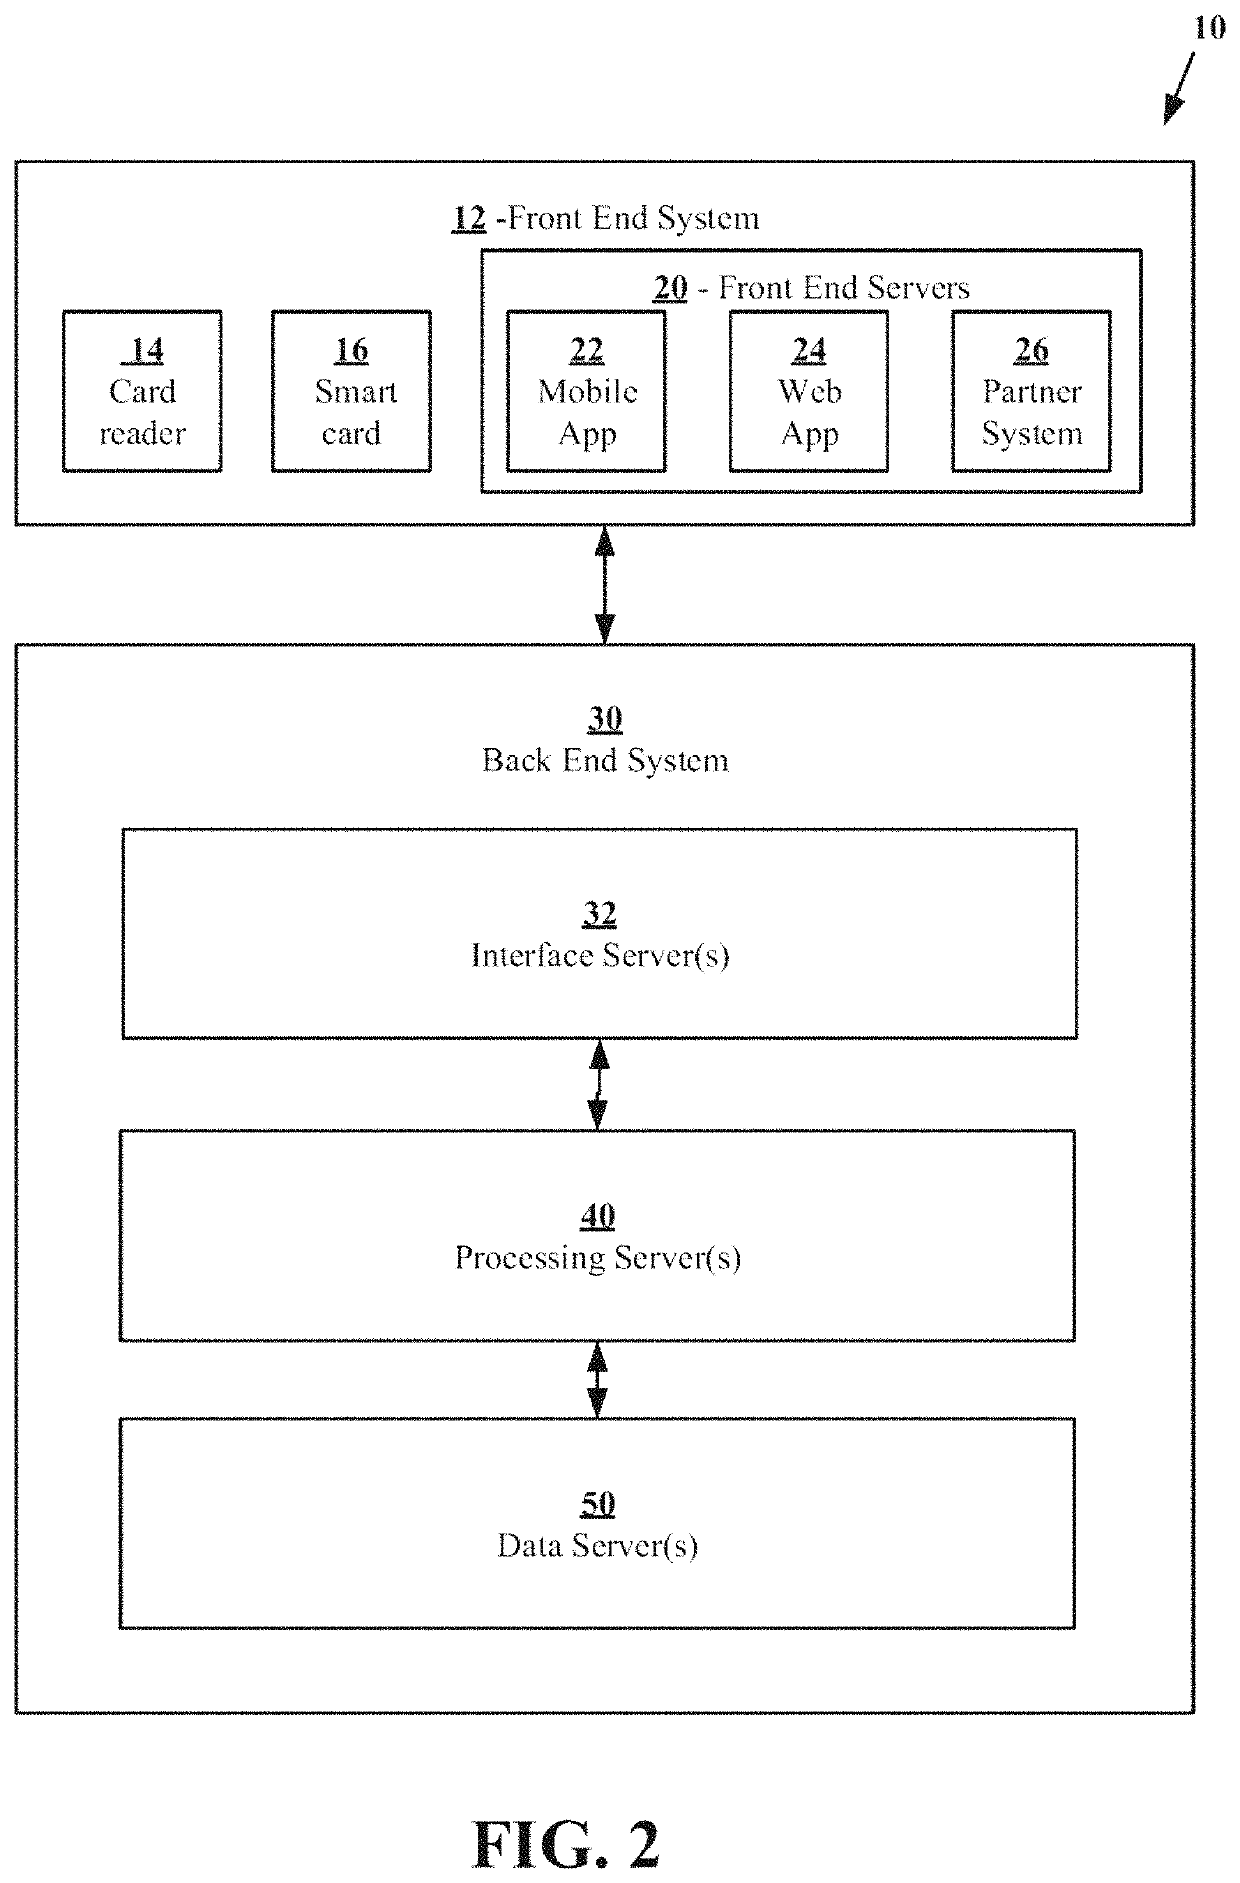 System for storing, processing, and accessing medical data